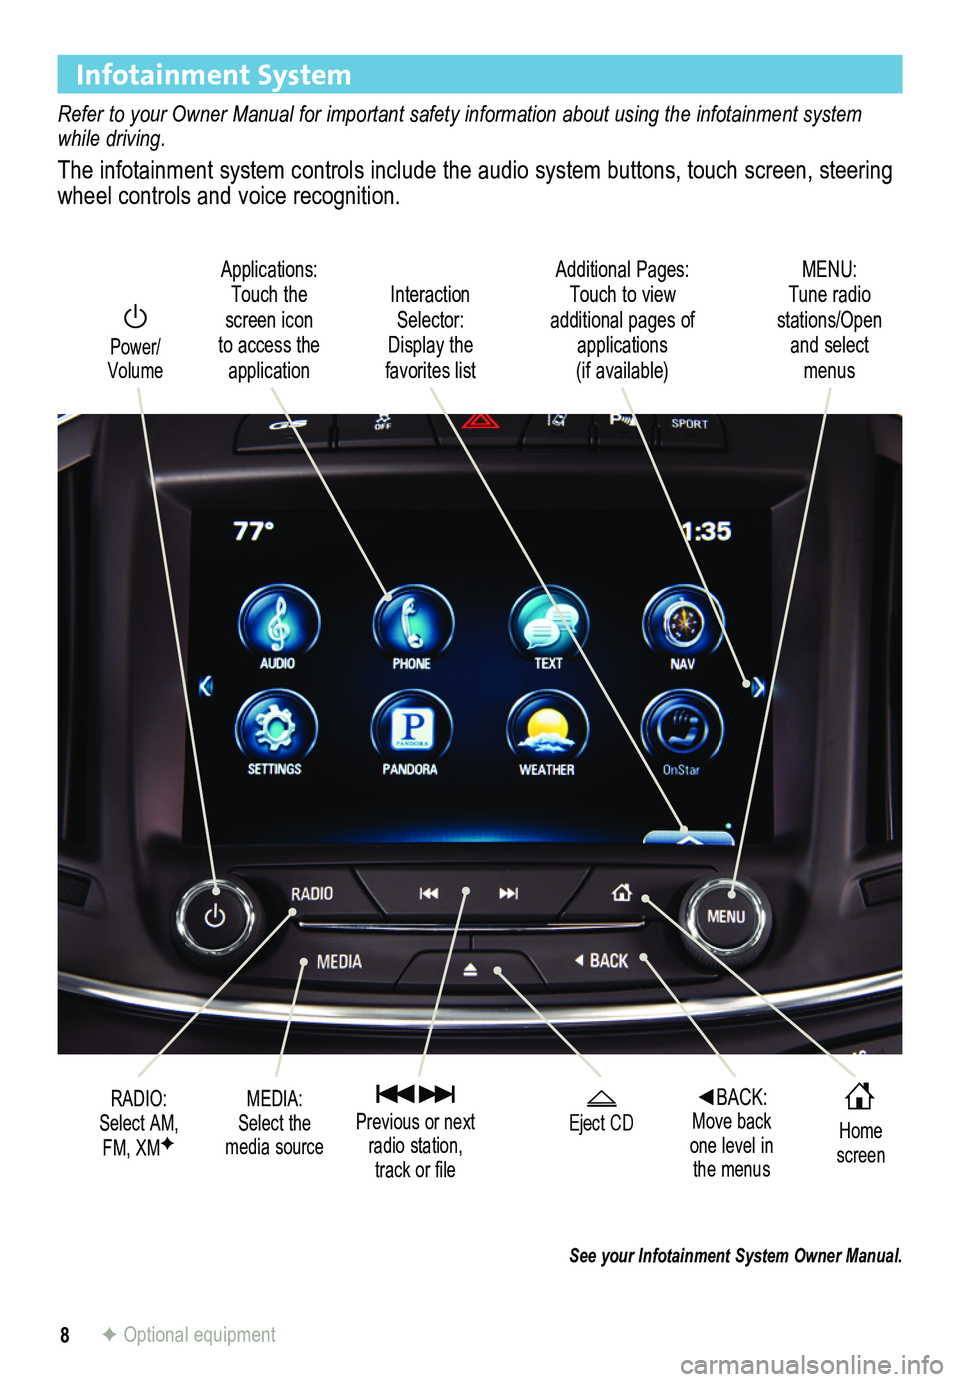 BUICK REGAL 2015  Get To Know Guide 8
Infotainment System
Refer to your Owner Manual for important safety information about using \
the infotainment system while driving.
The infotainment system controls include the audio system buttons